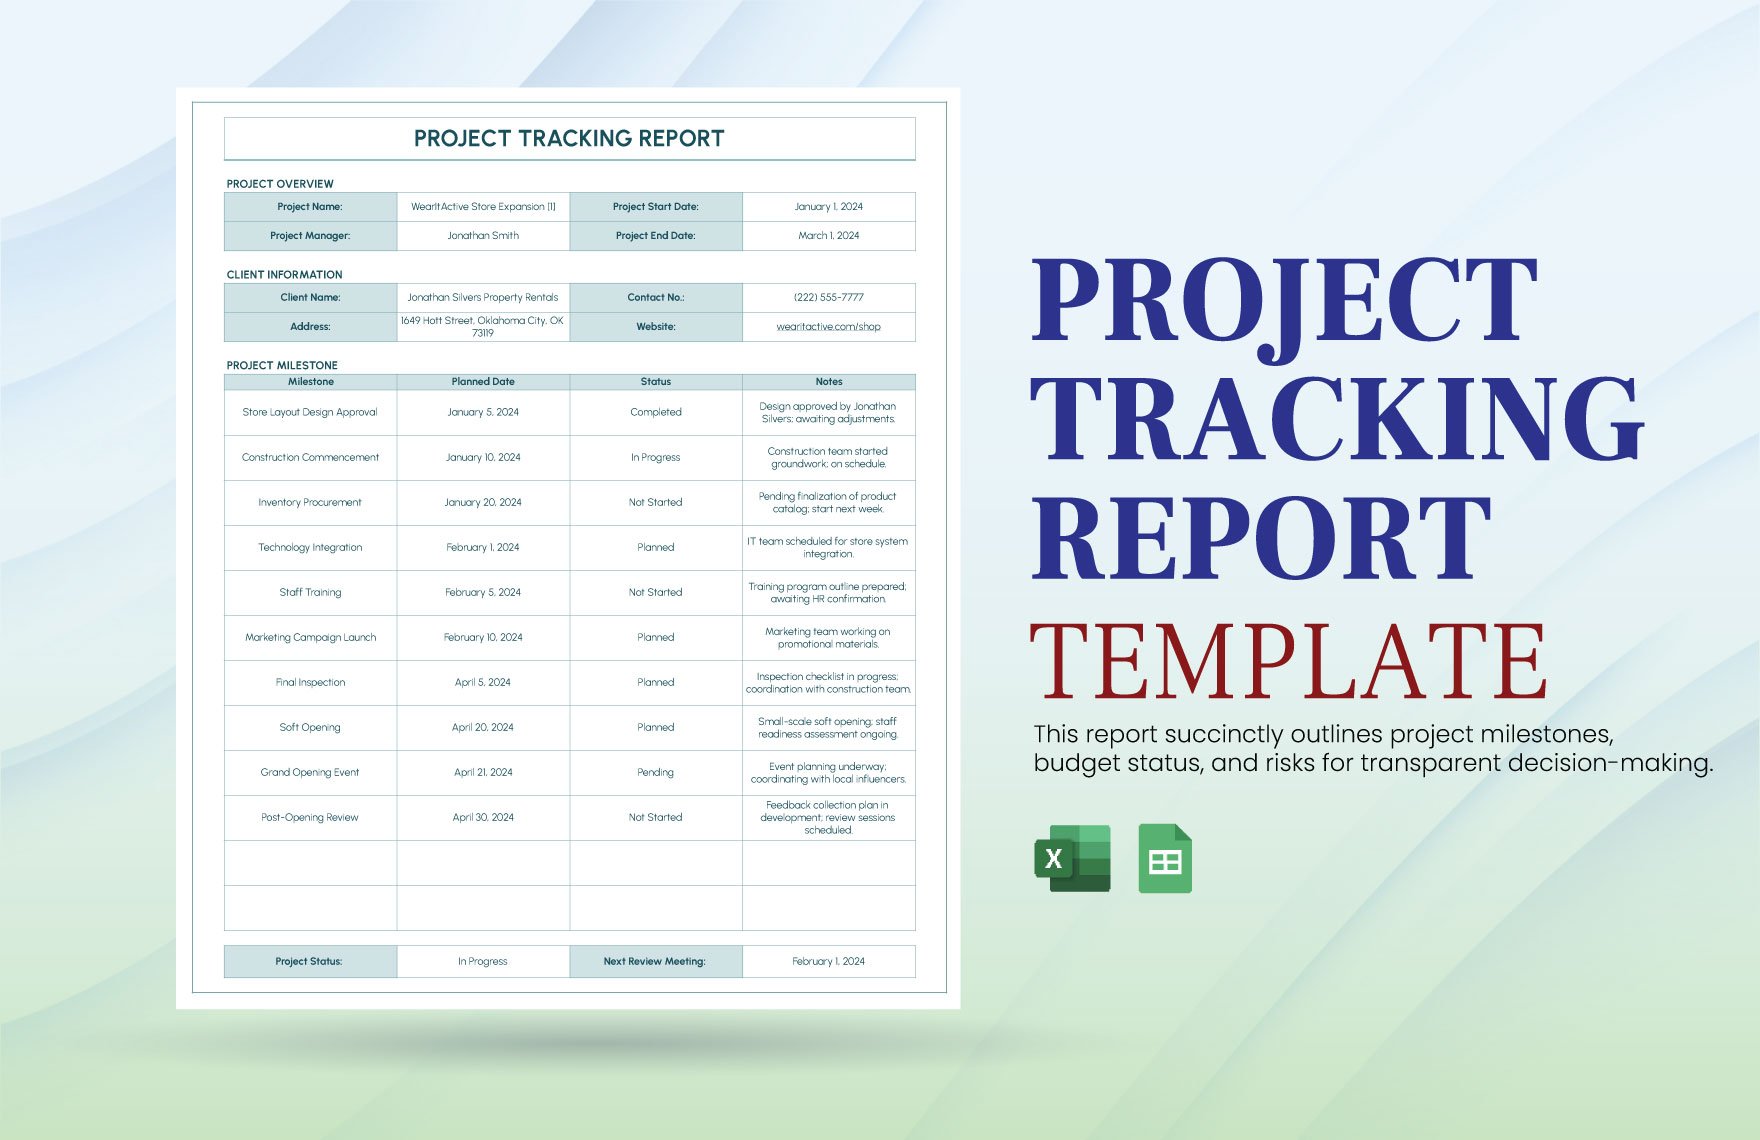 Project Tracking Report Template